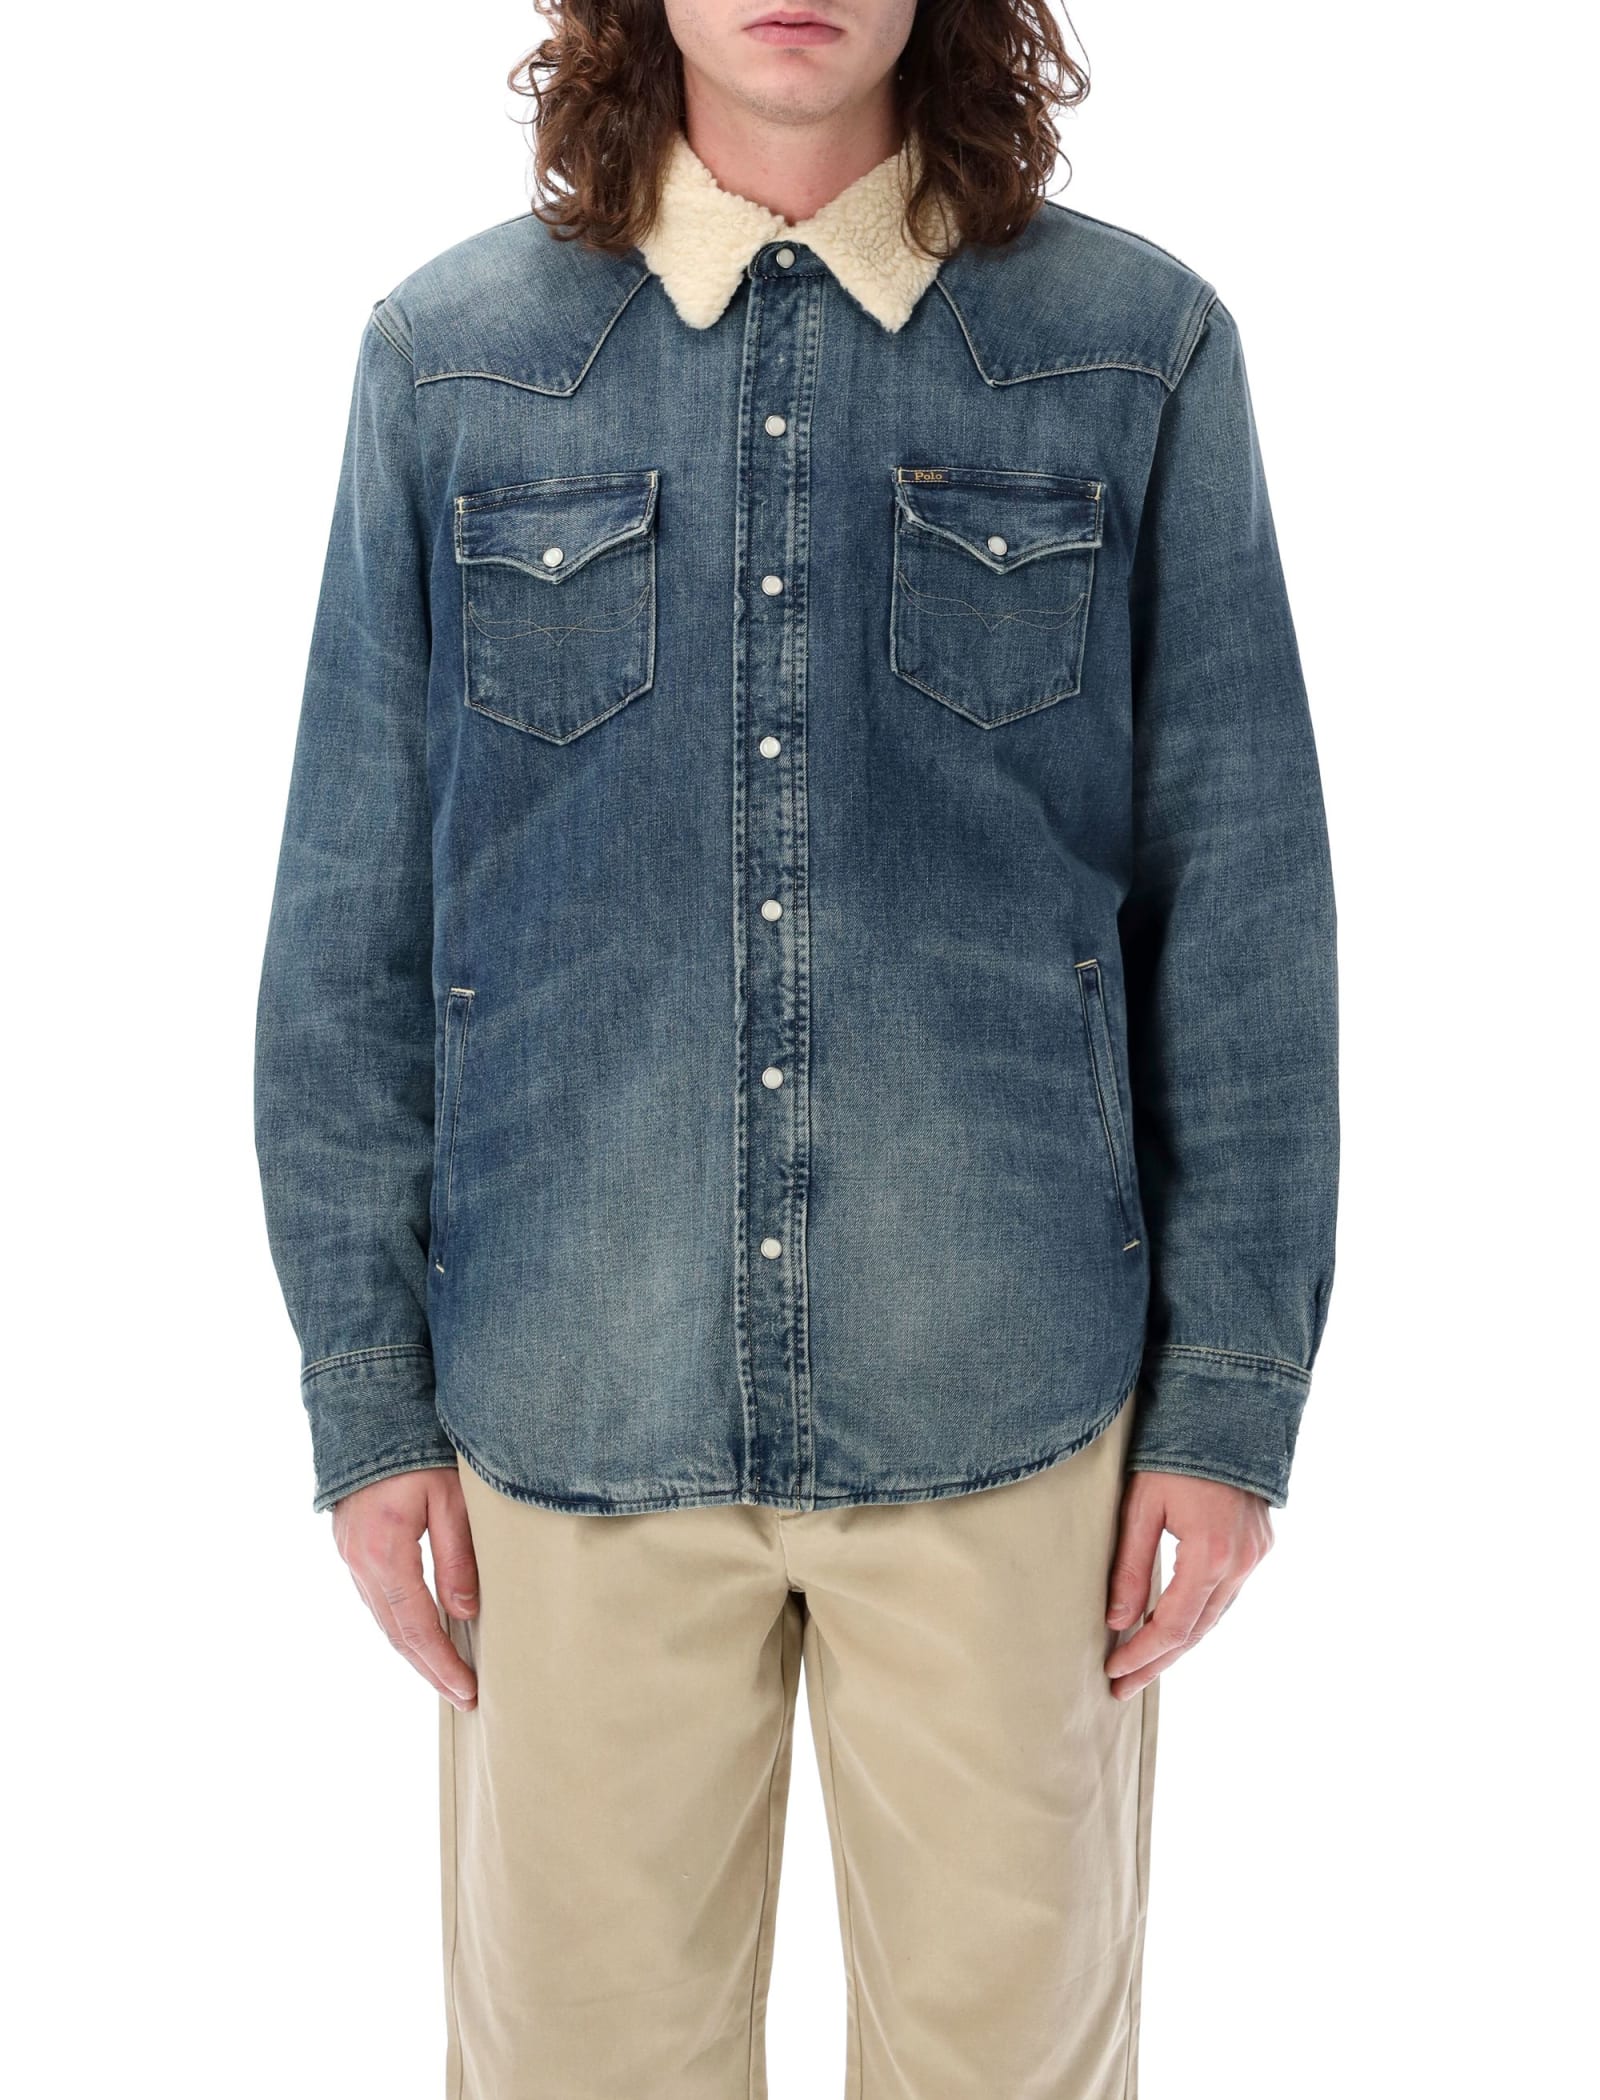 The New Denim Project Jacket